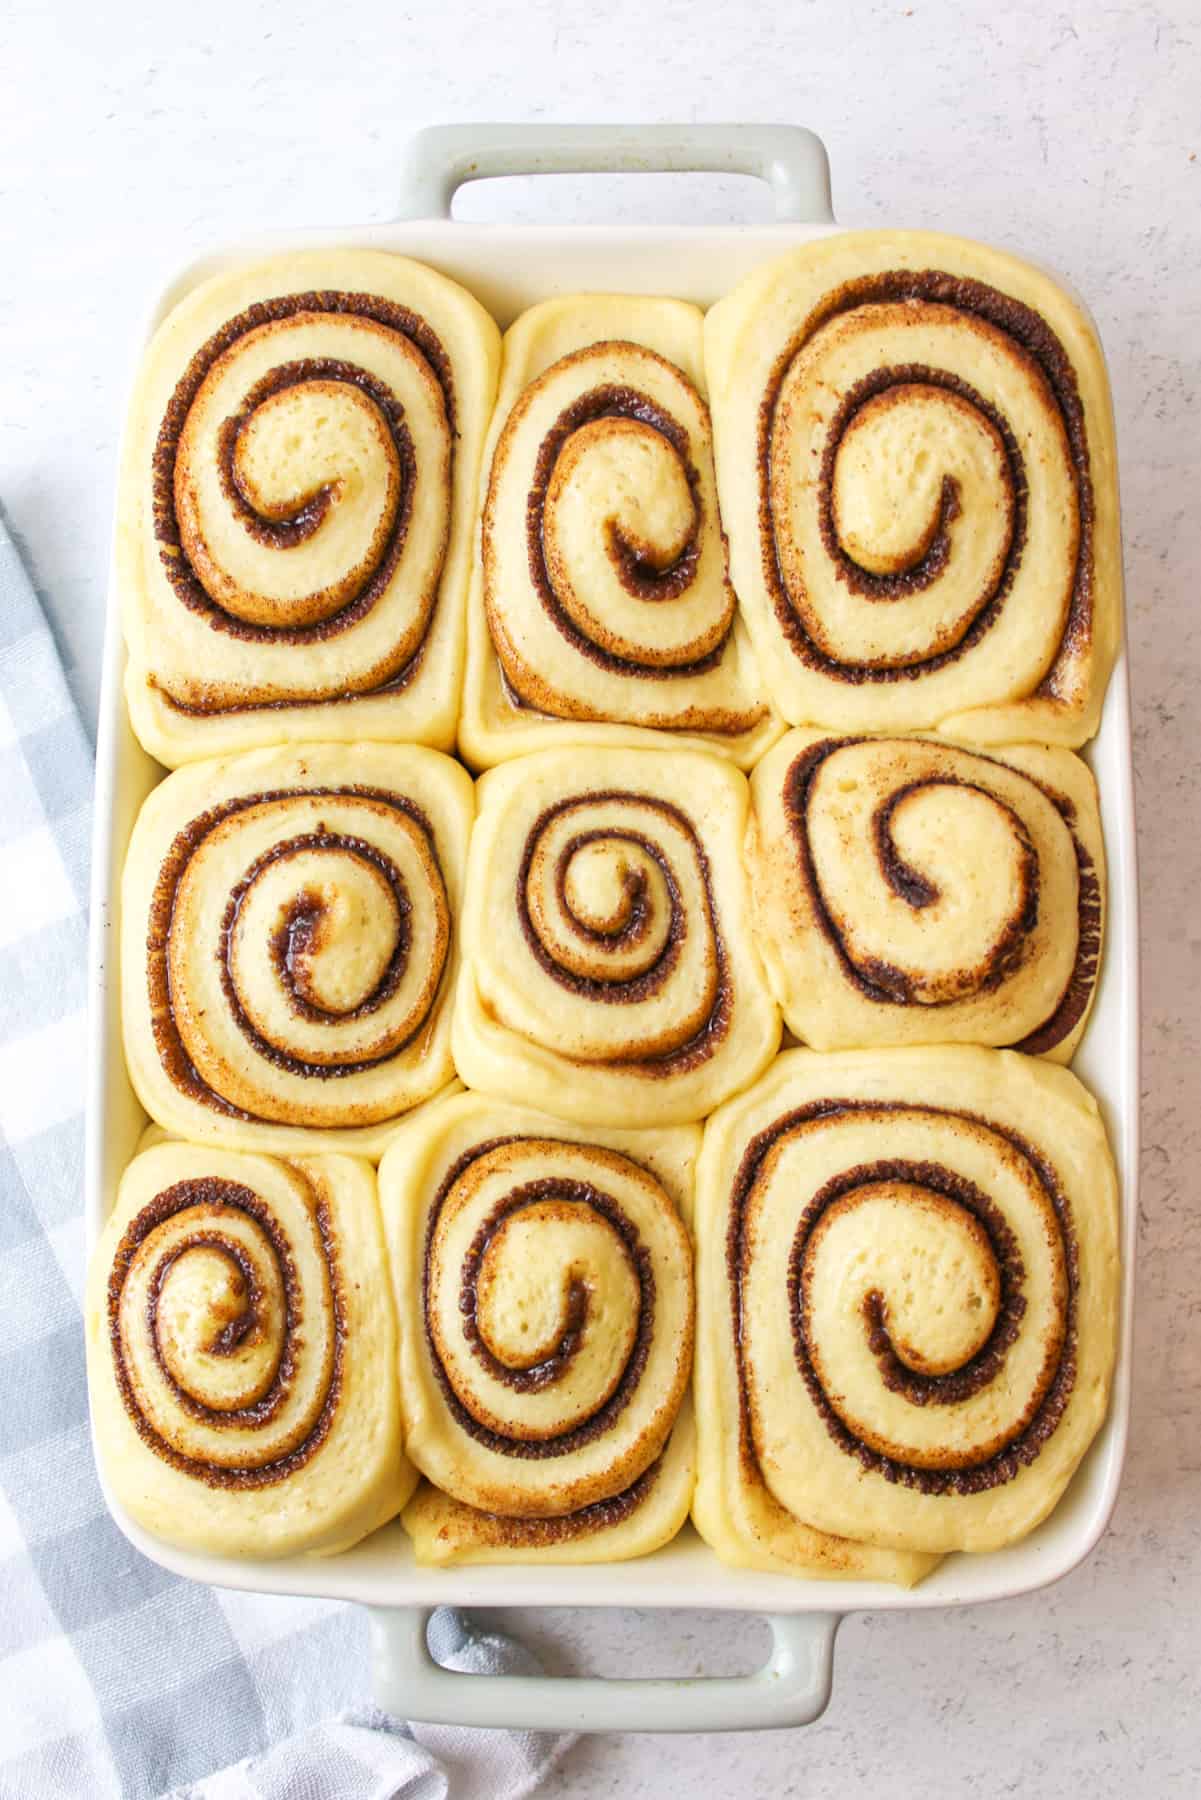 an aerial view of a tray full of cinnamon rolls